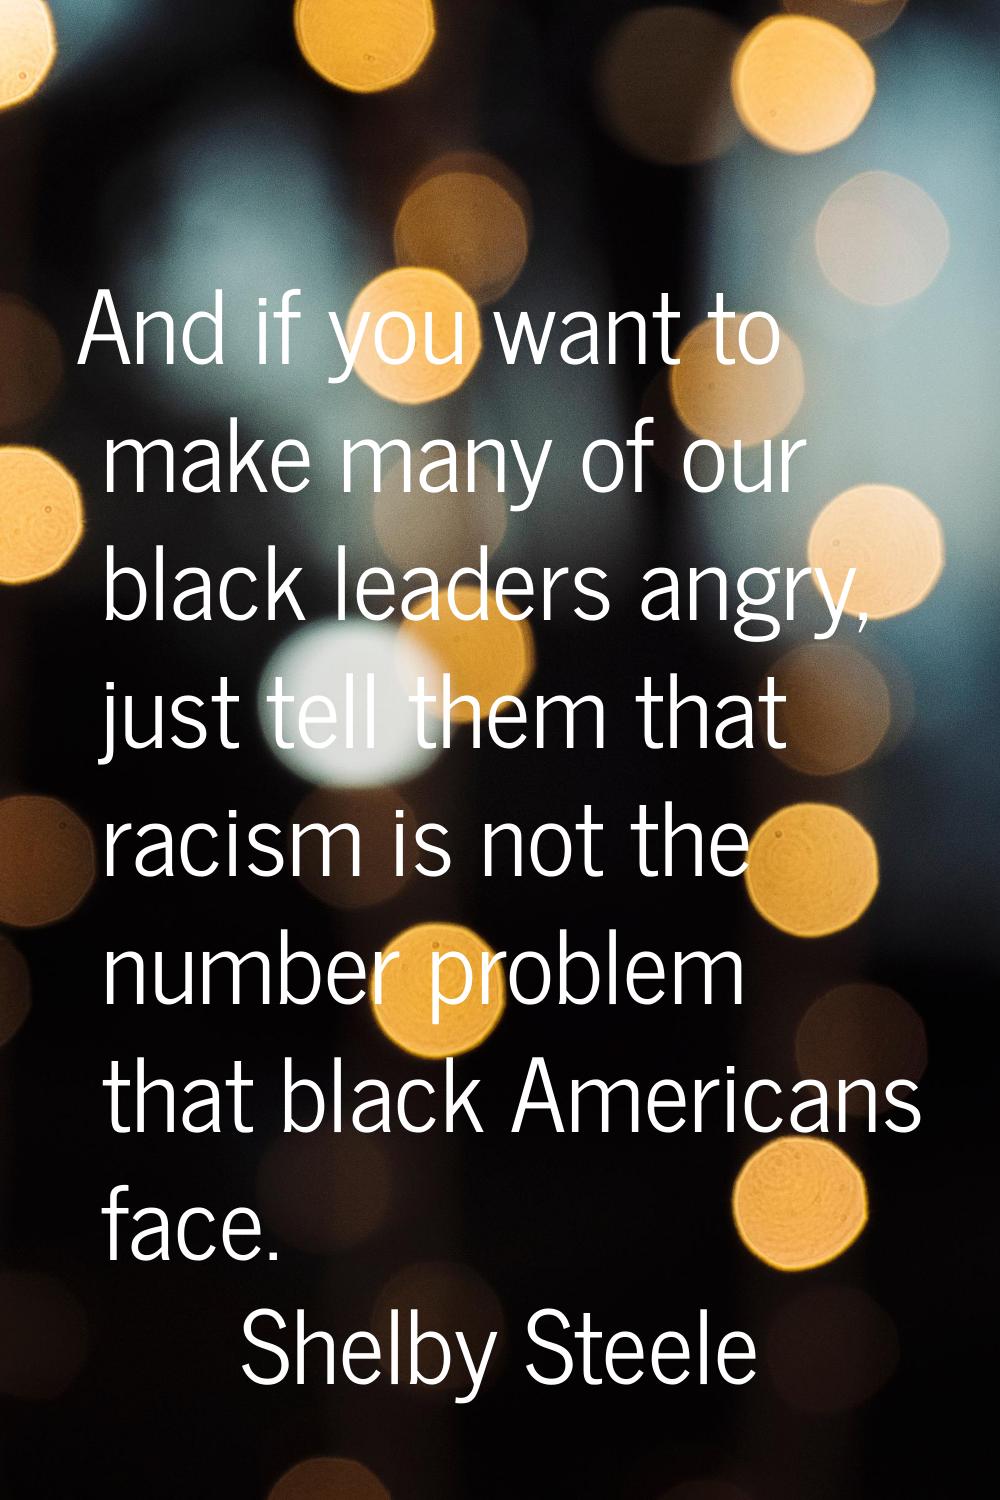 And if you want to make many of our black leaders angry, just tell them that racism is not the numb